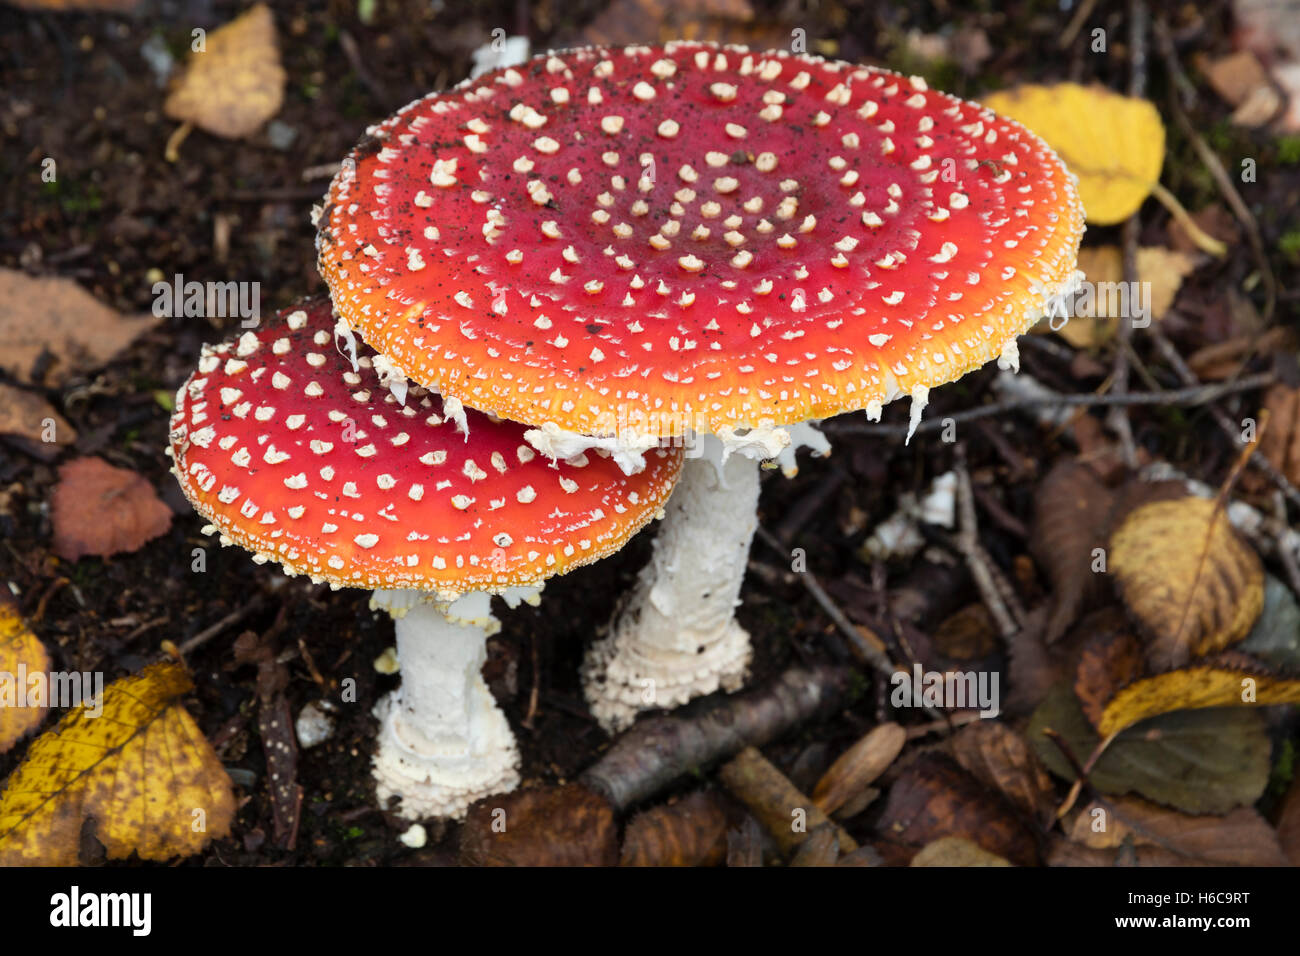 Amanita muscaria, fly agaric toadstools, showing spotted red caps amidst fallen birch leaves Stock Photo